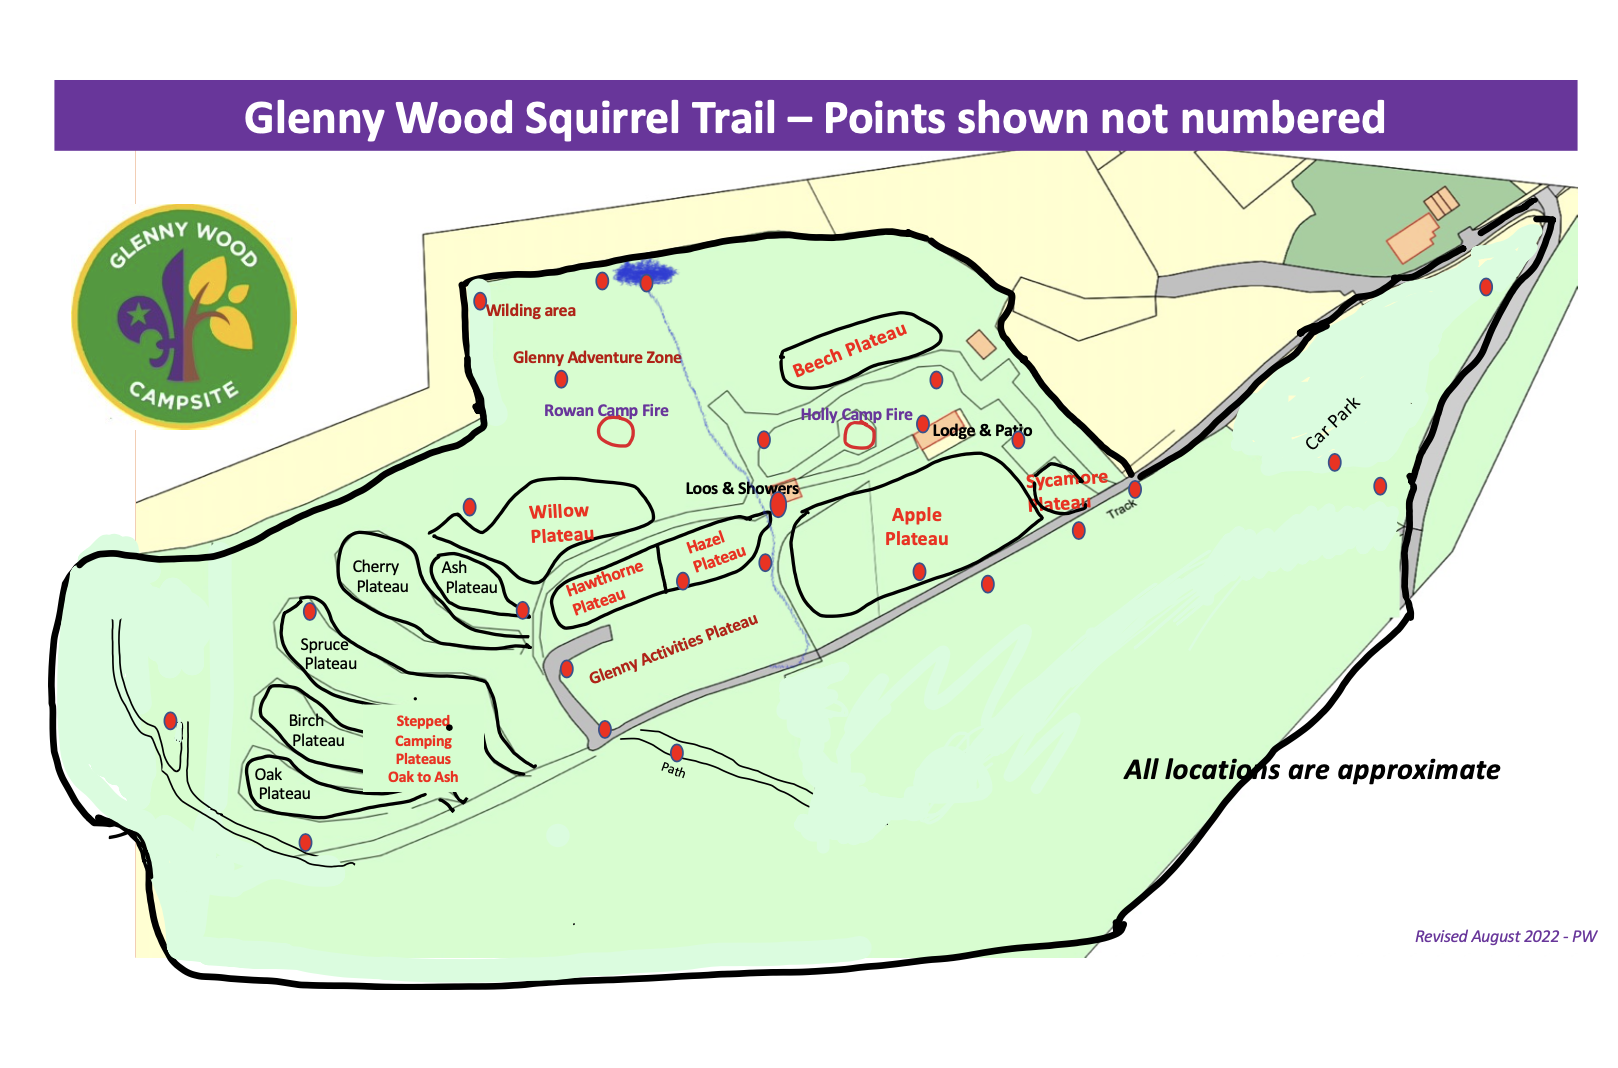 Glenny Wood Squirrel Trail – Points shown & not numbered.